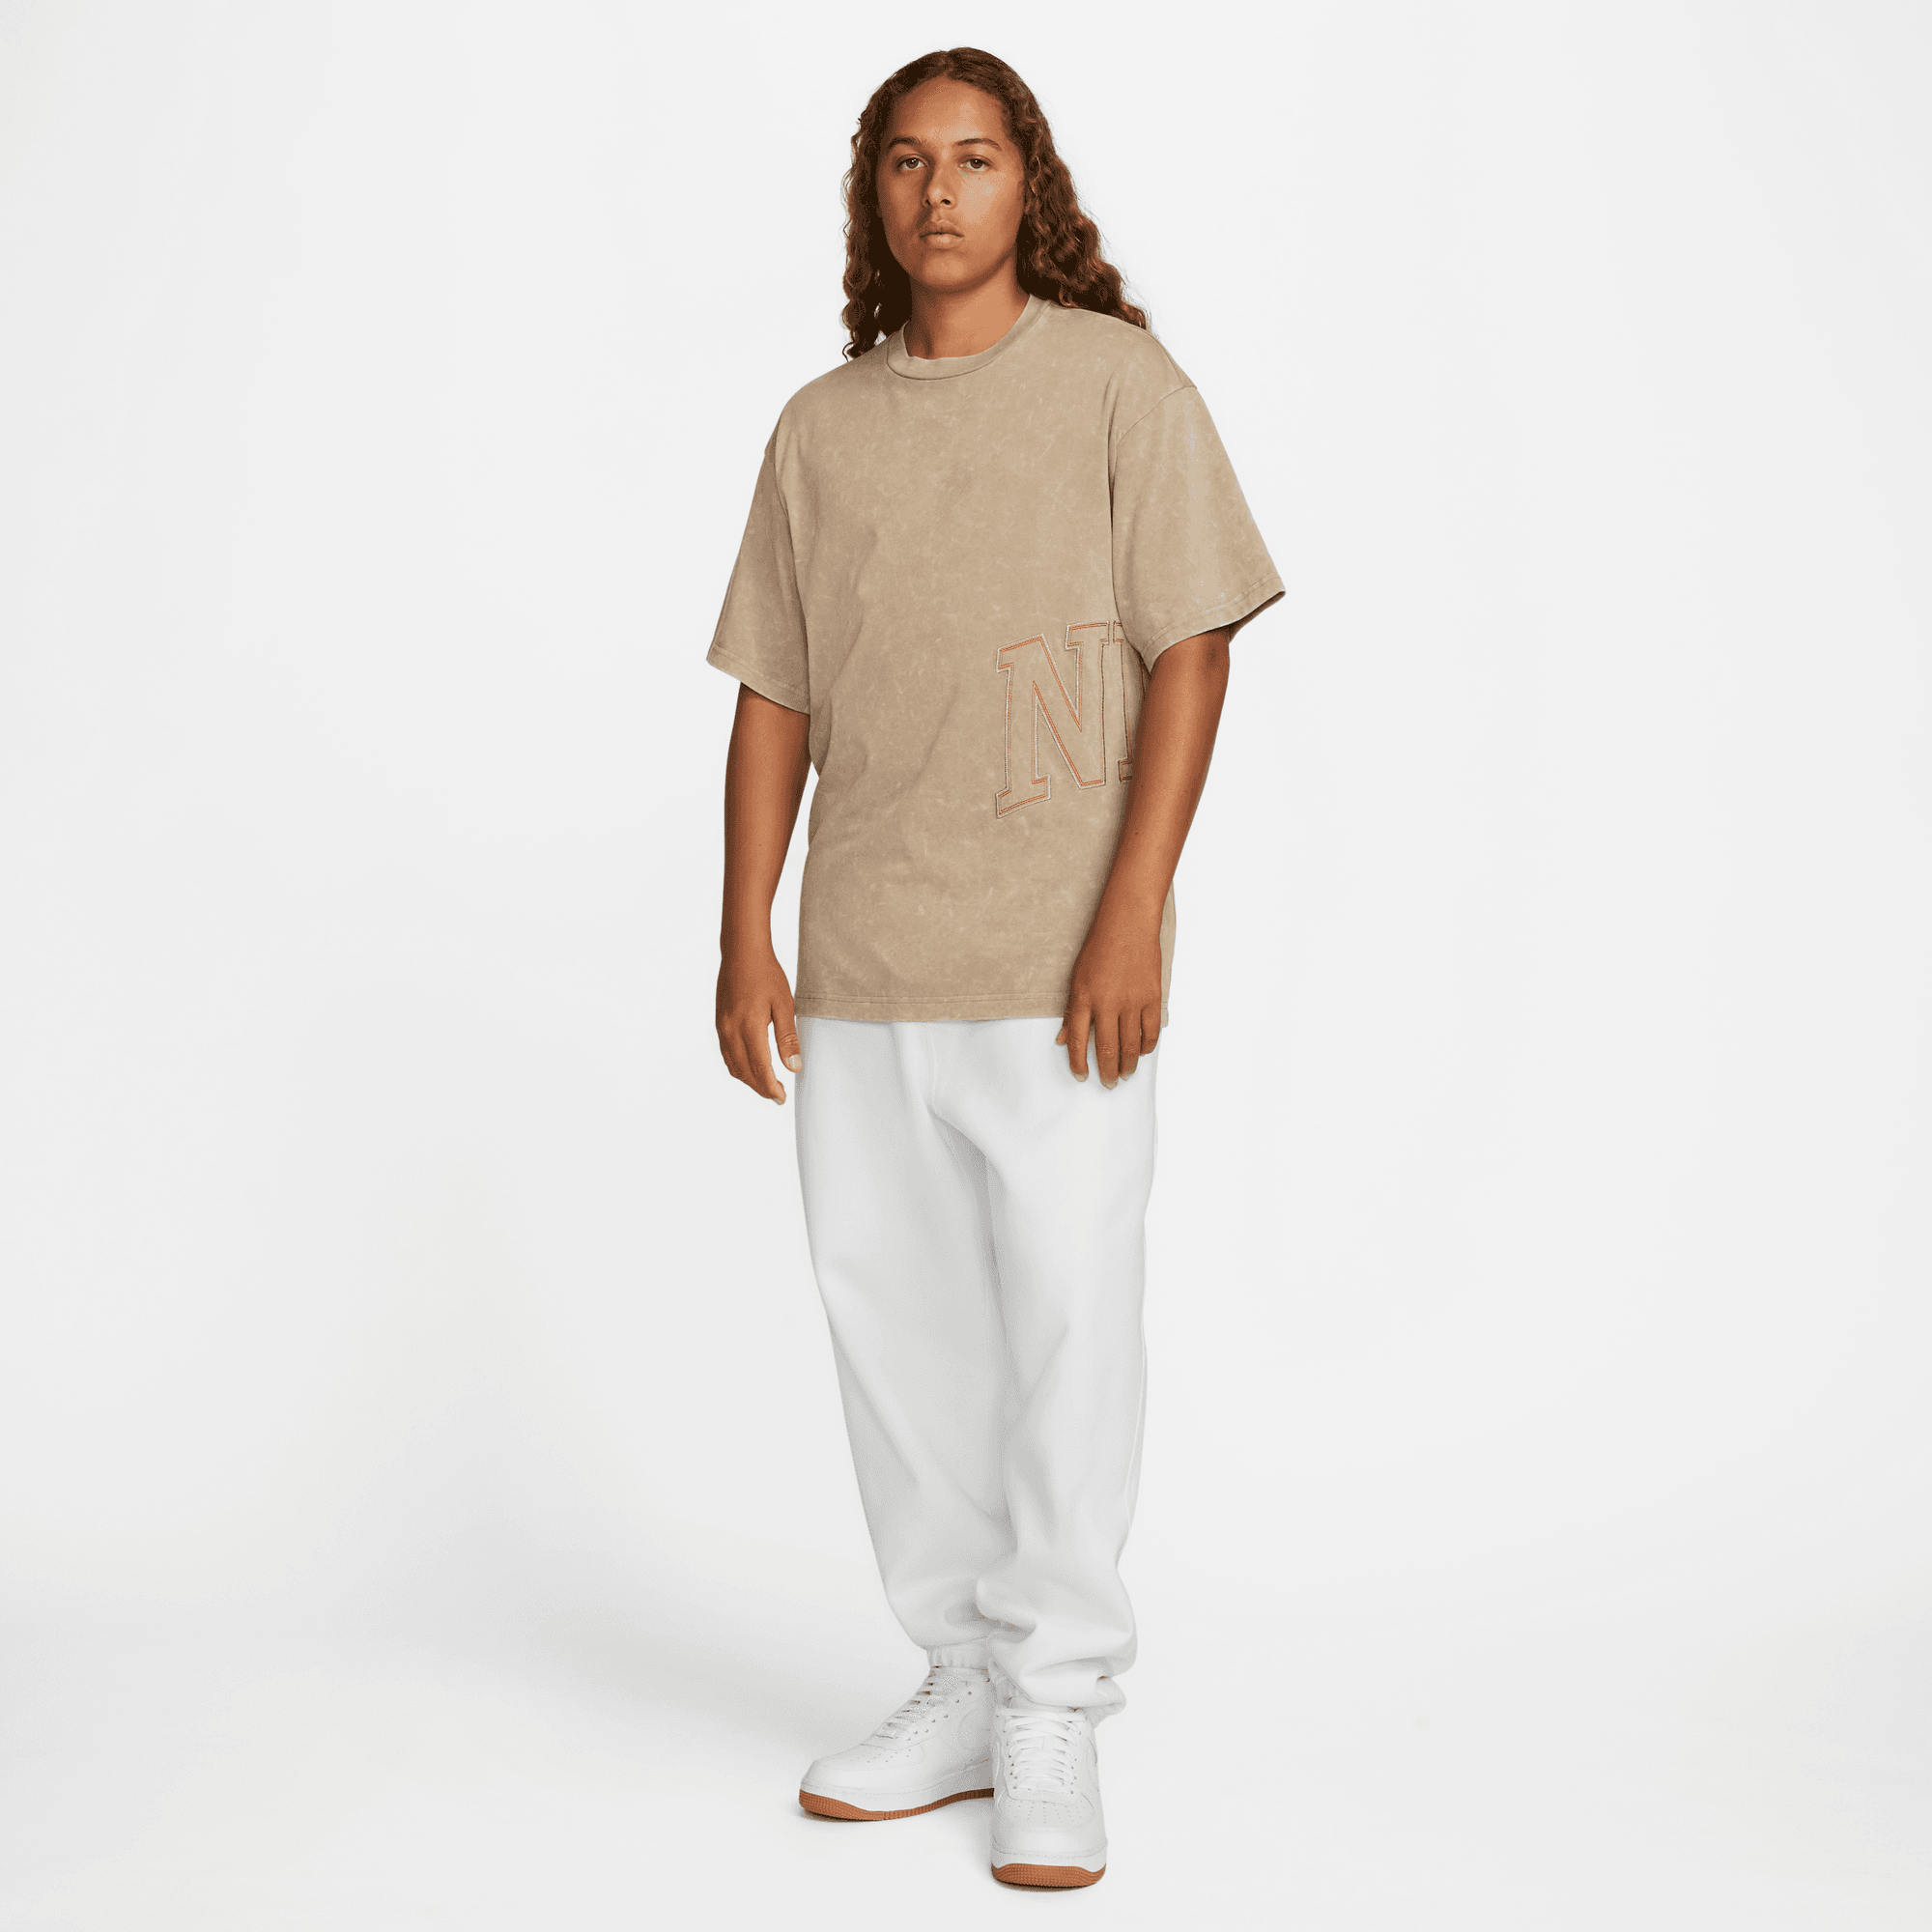 How to Style an Nike Oversized T-shirt.